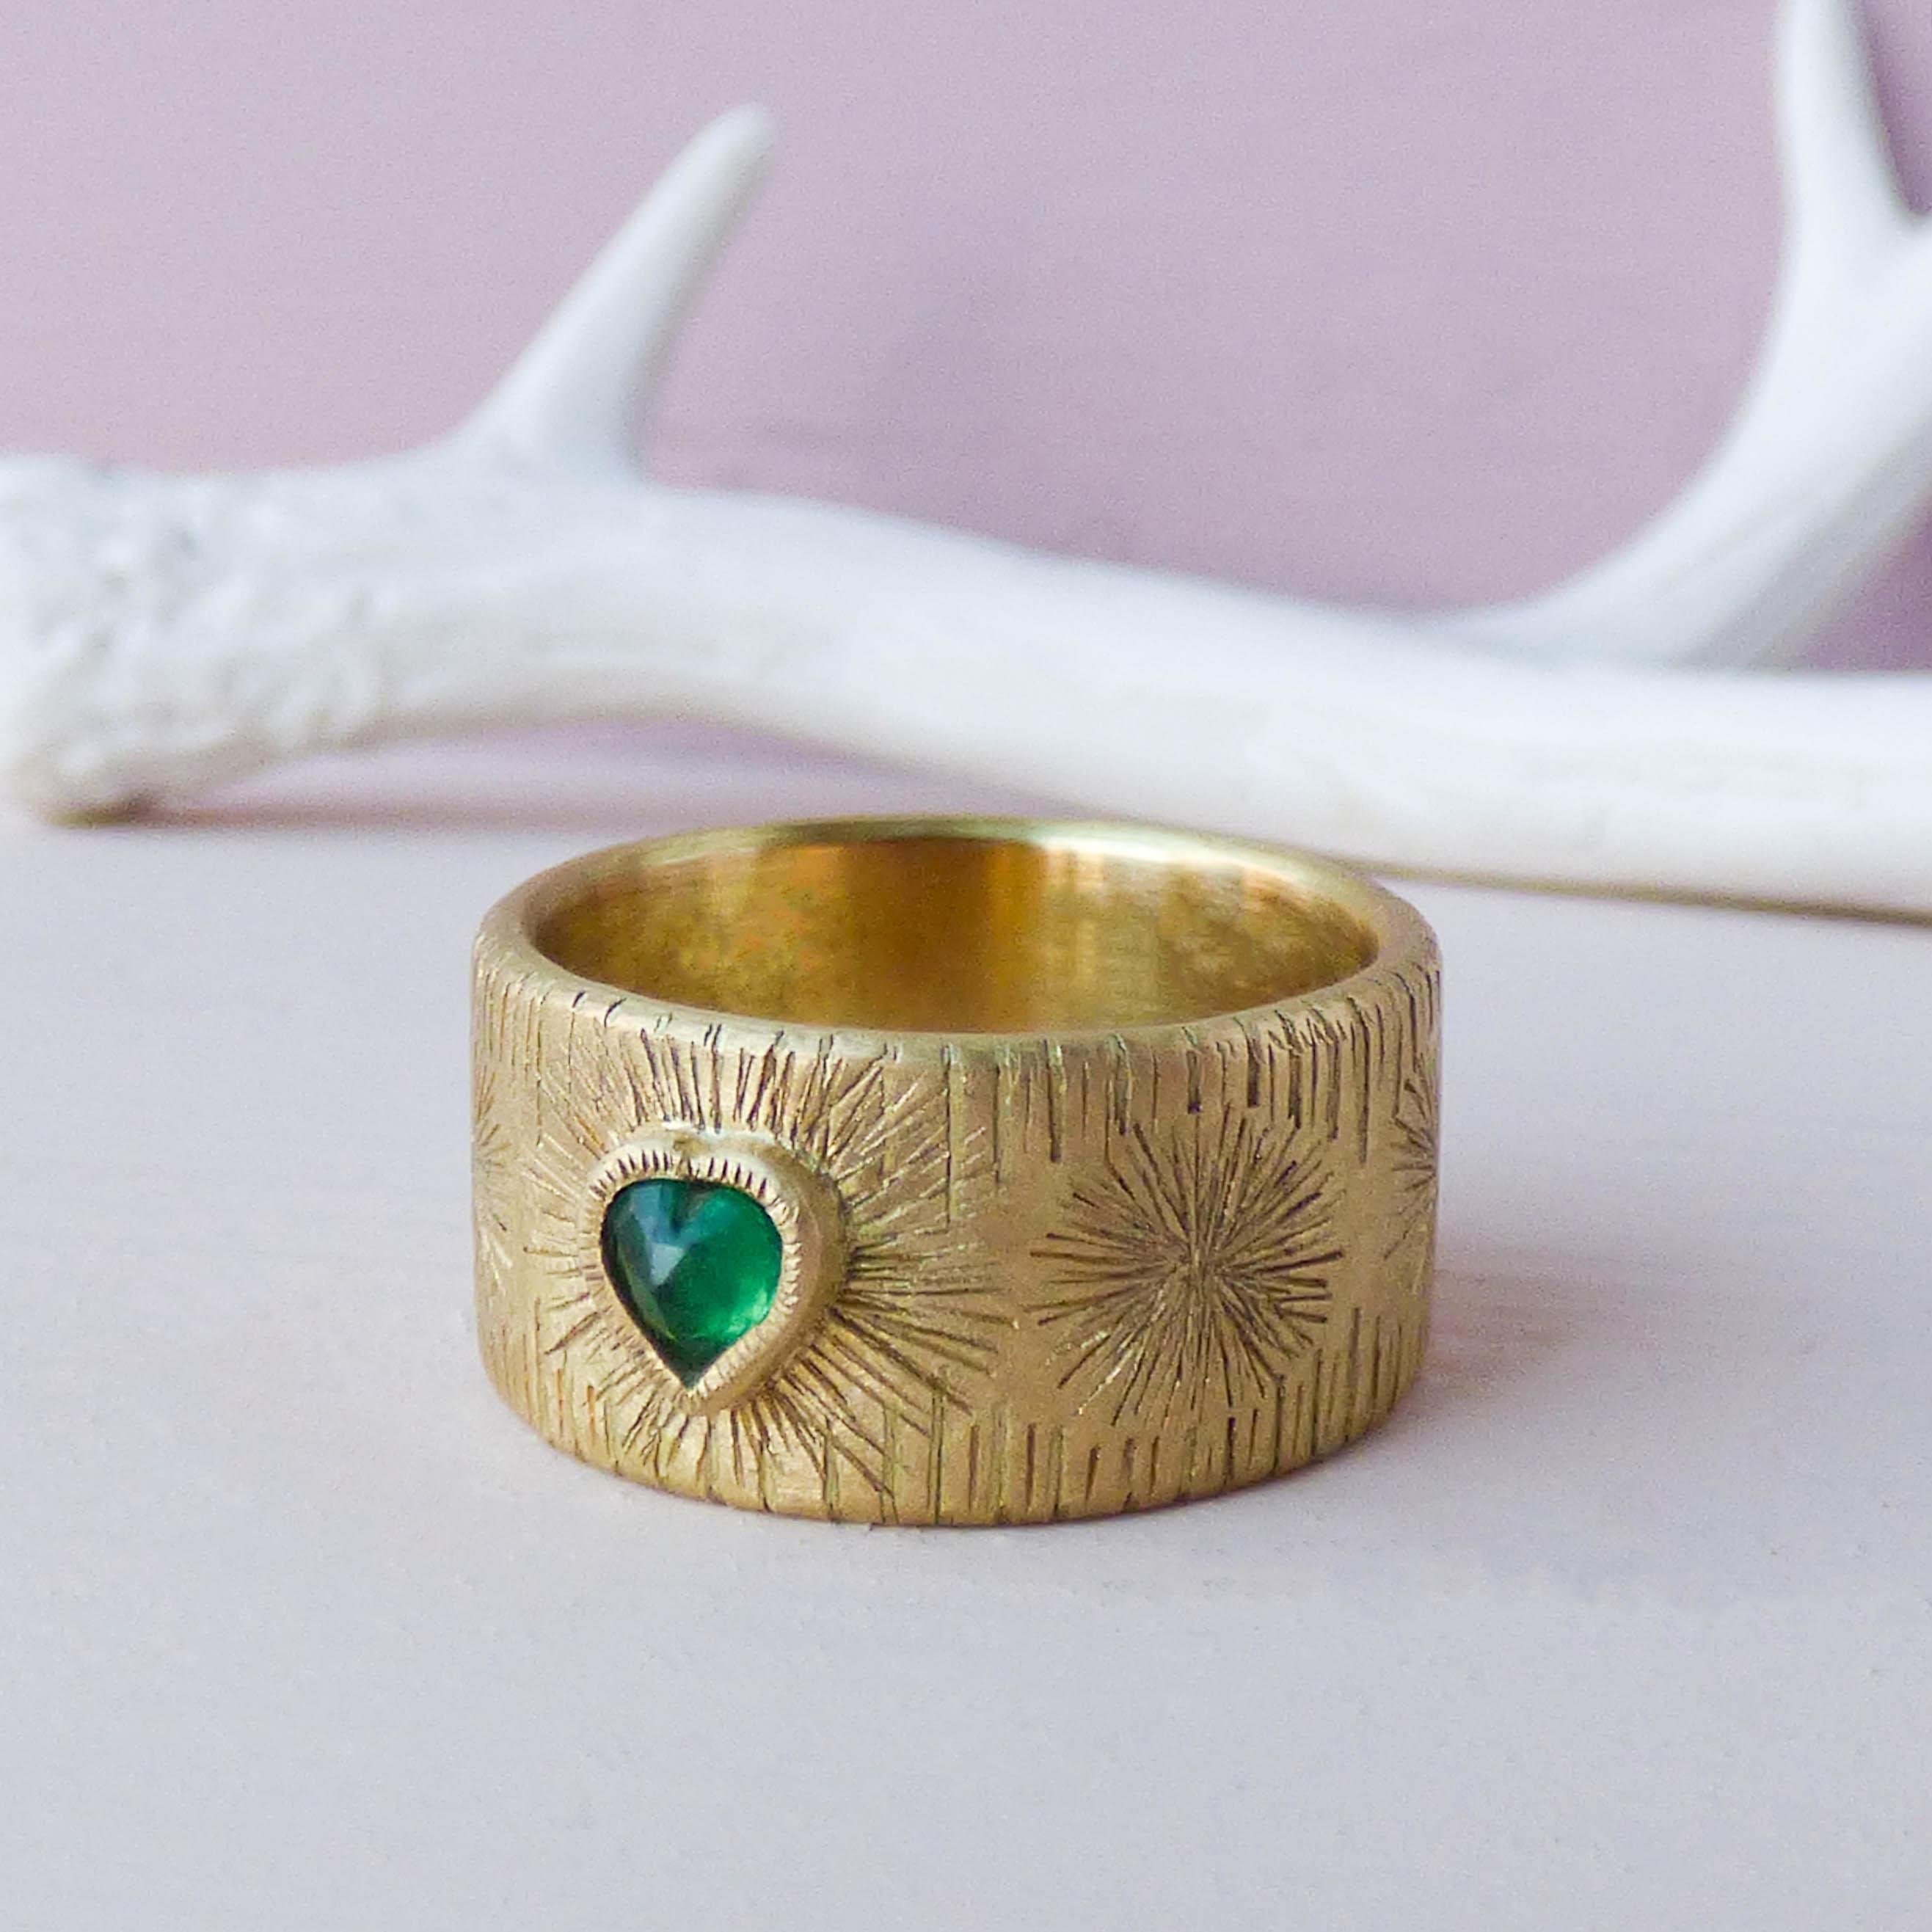 For Sale:  18K Fairtrade Yellow Gold Ring with 0.25 Carat Emerald Heart 4